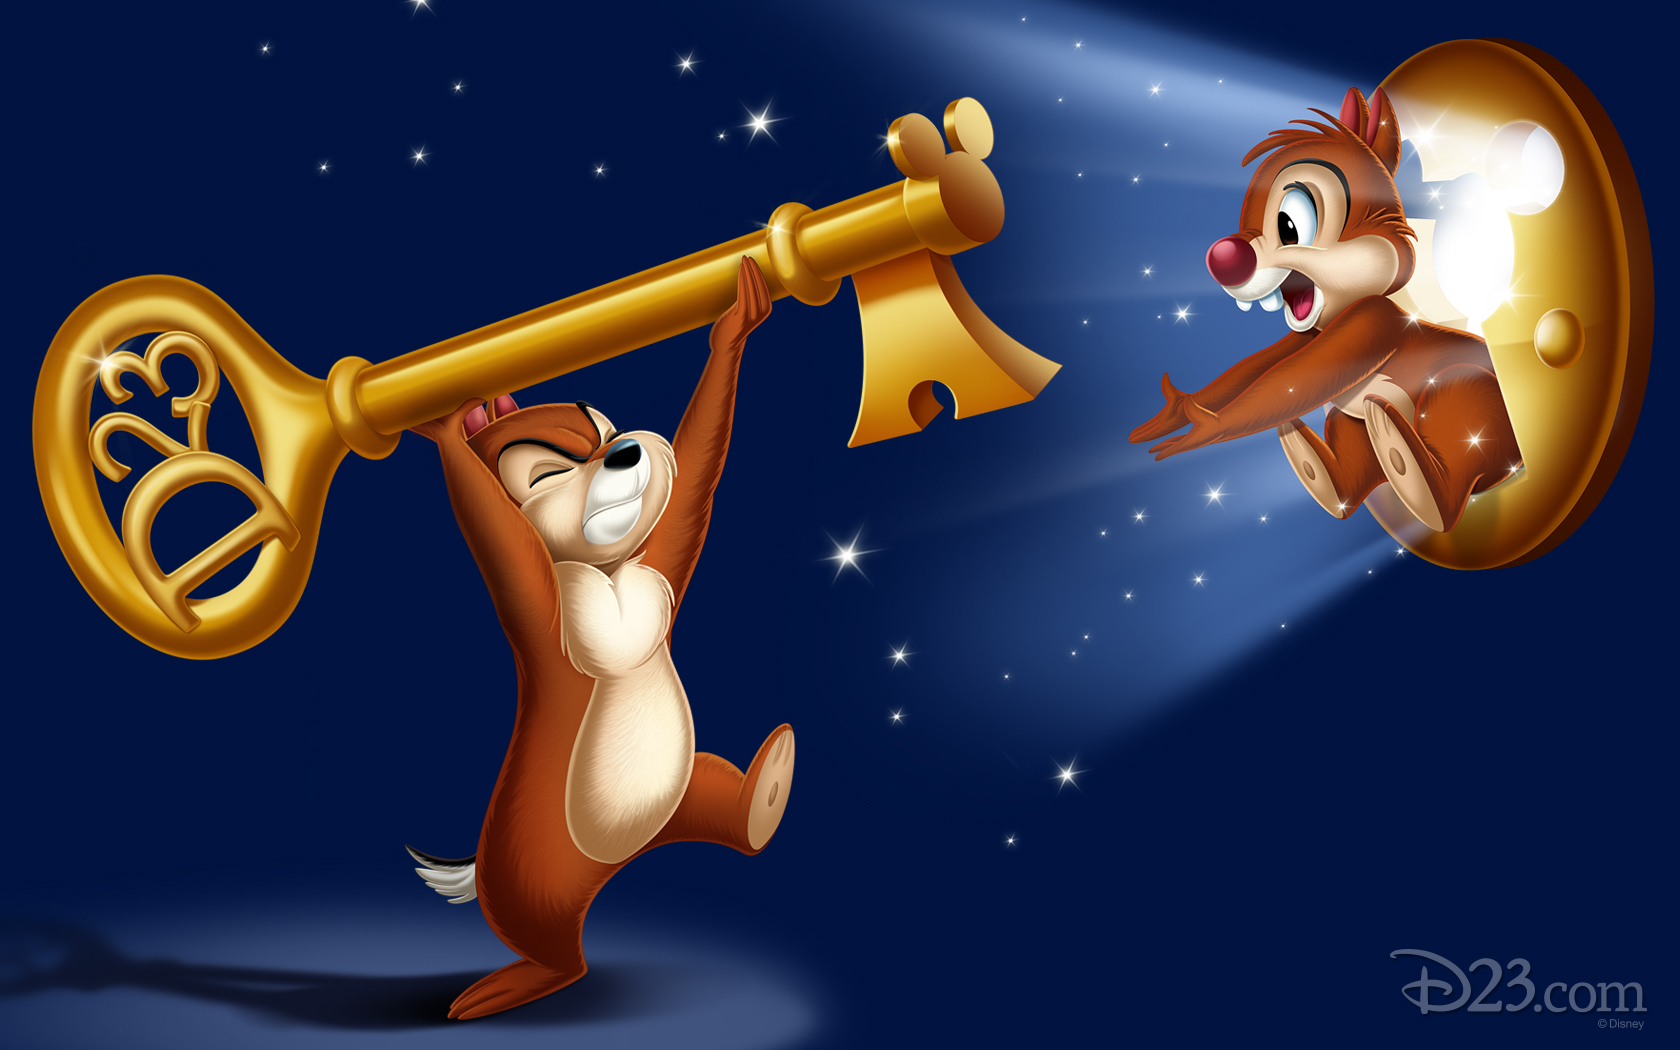 Chip And Dale Wallpapers